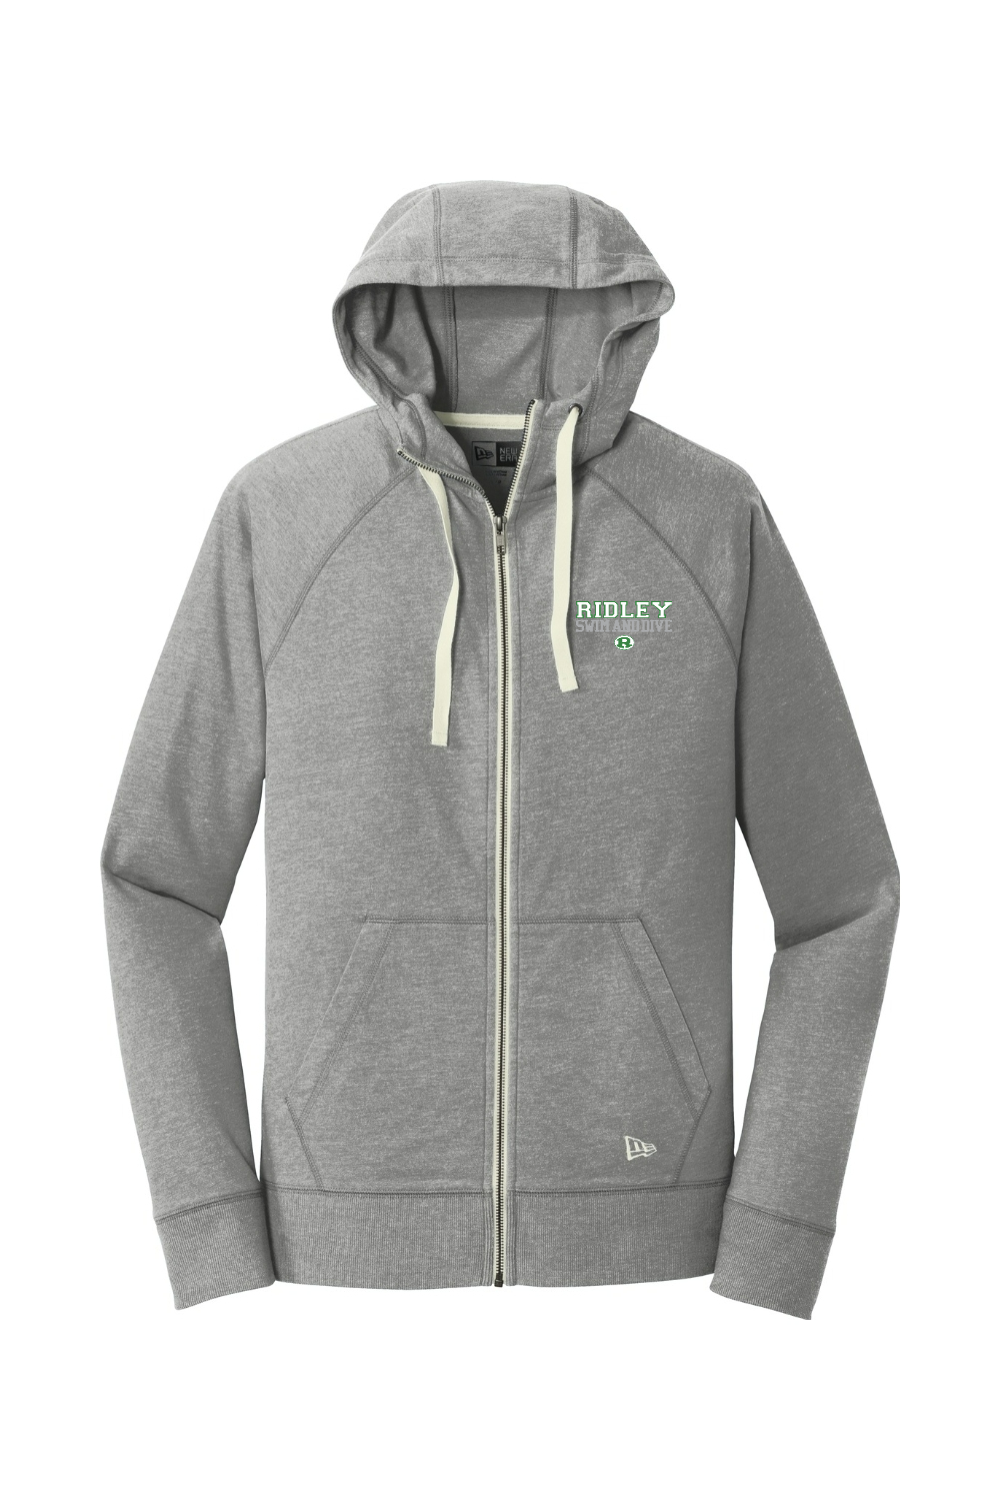 Ridley Swim and Dive New Era Sueded Cotton Blend Full-Zip Hoodie